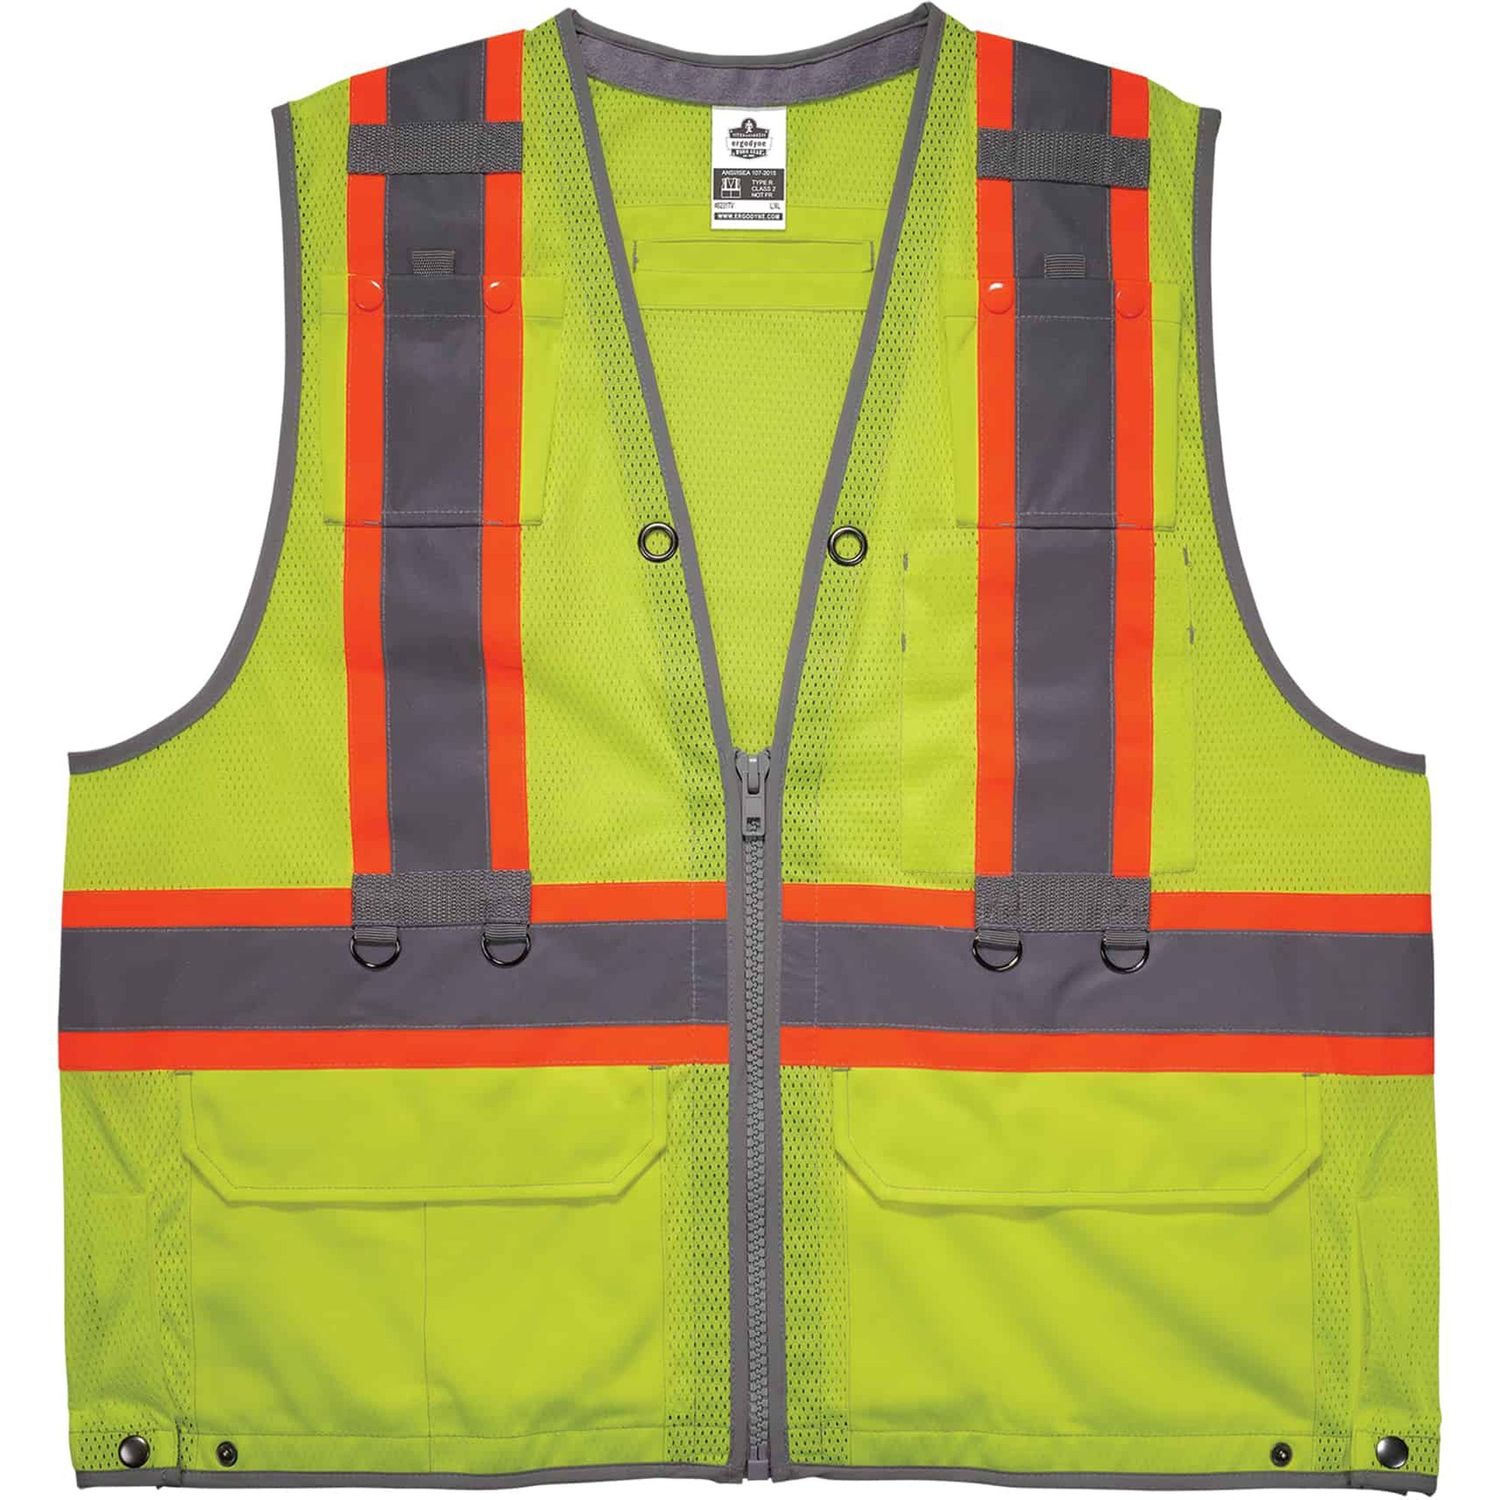 8231TV Hi-Vis Tool Tethering Safety Vest - Type R Class 2 Recommended for: Construction, Utility, Oil & Gas, Telecommunication, Power Generation, Chest Pocket, Retractable Pocket